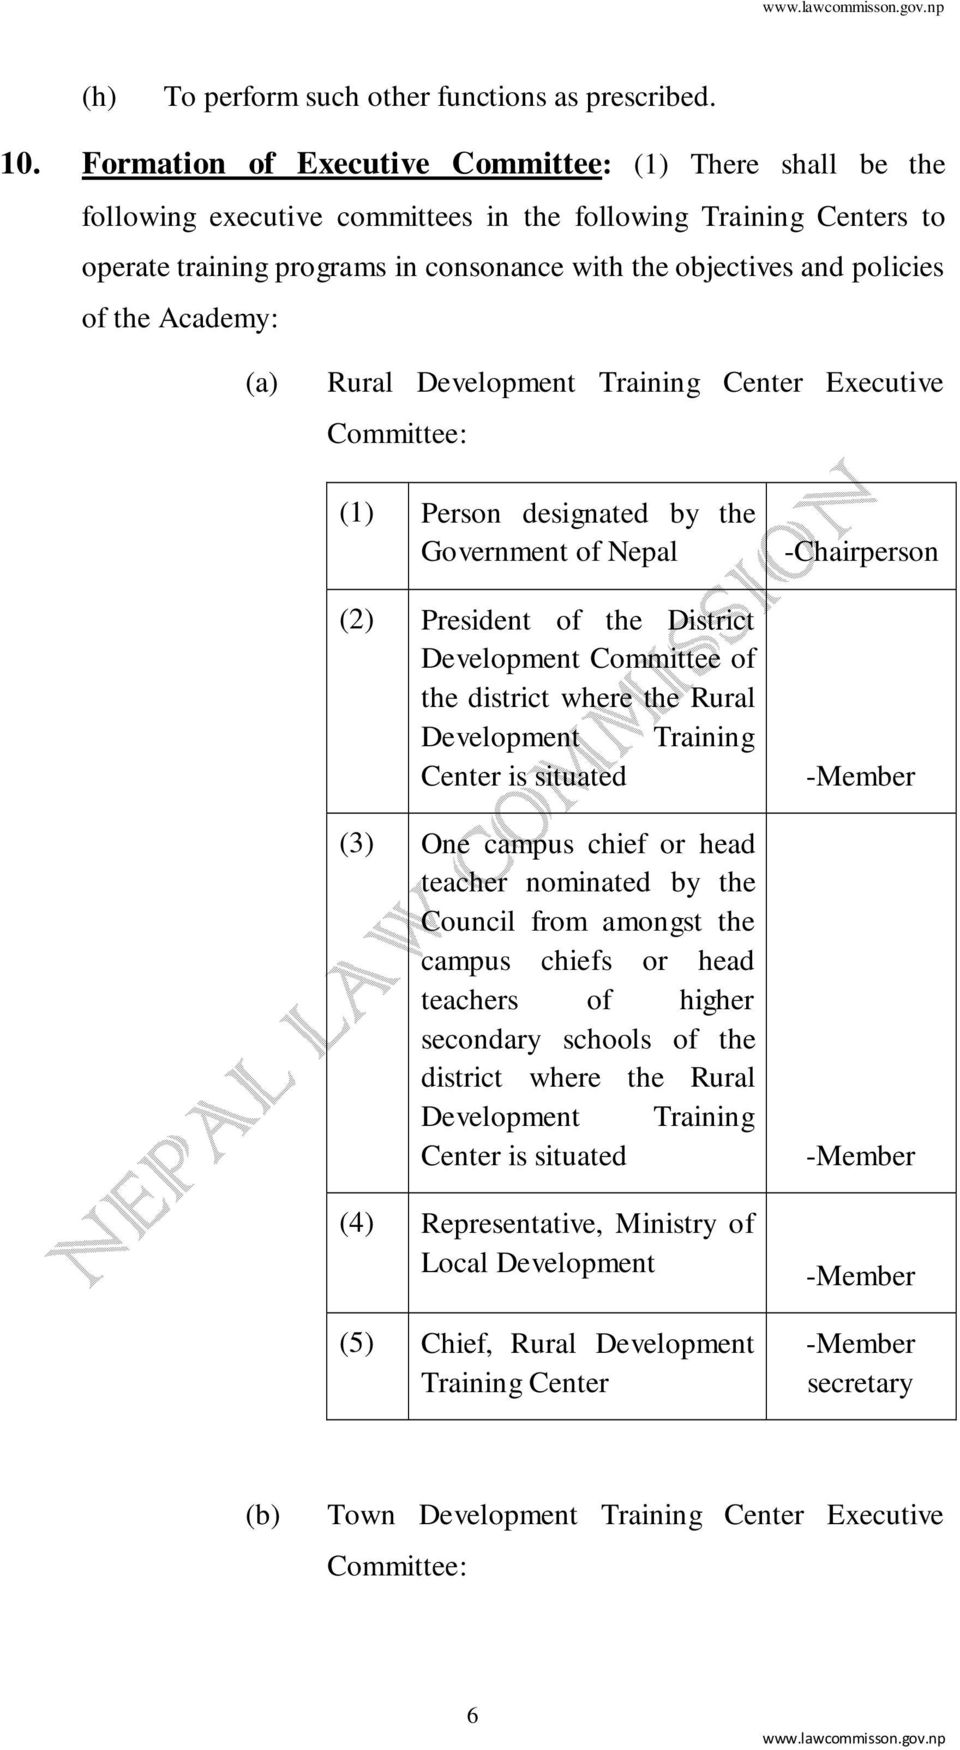 of the Academy: Rural Development Training Center Executive Committee: (1) Person designated by the Government of Nepal (2) President of the District Development Committee of the district where the